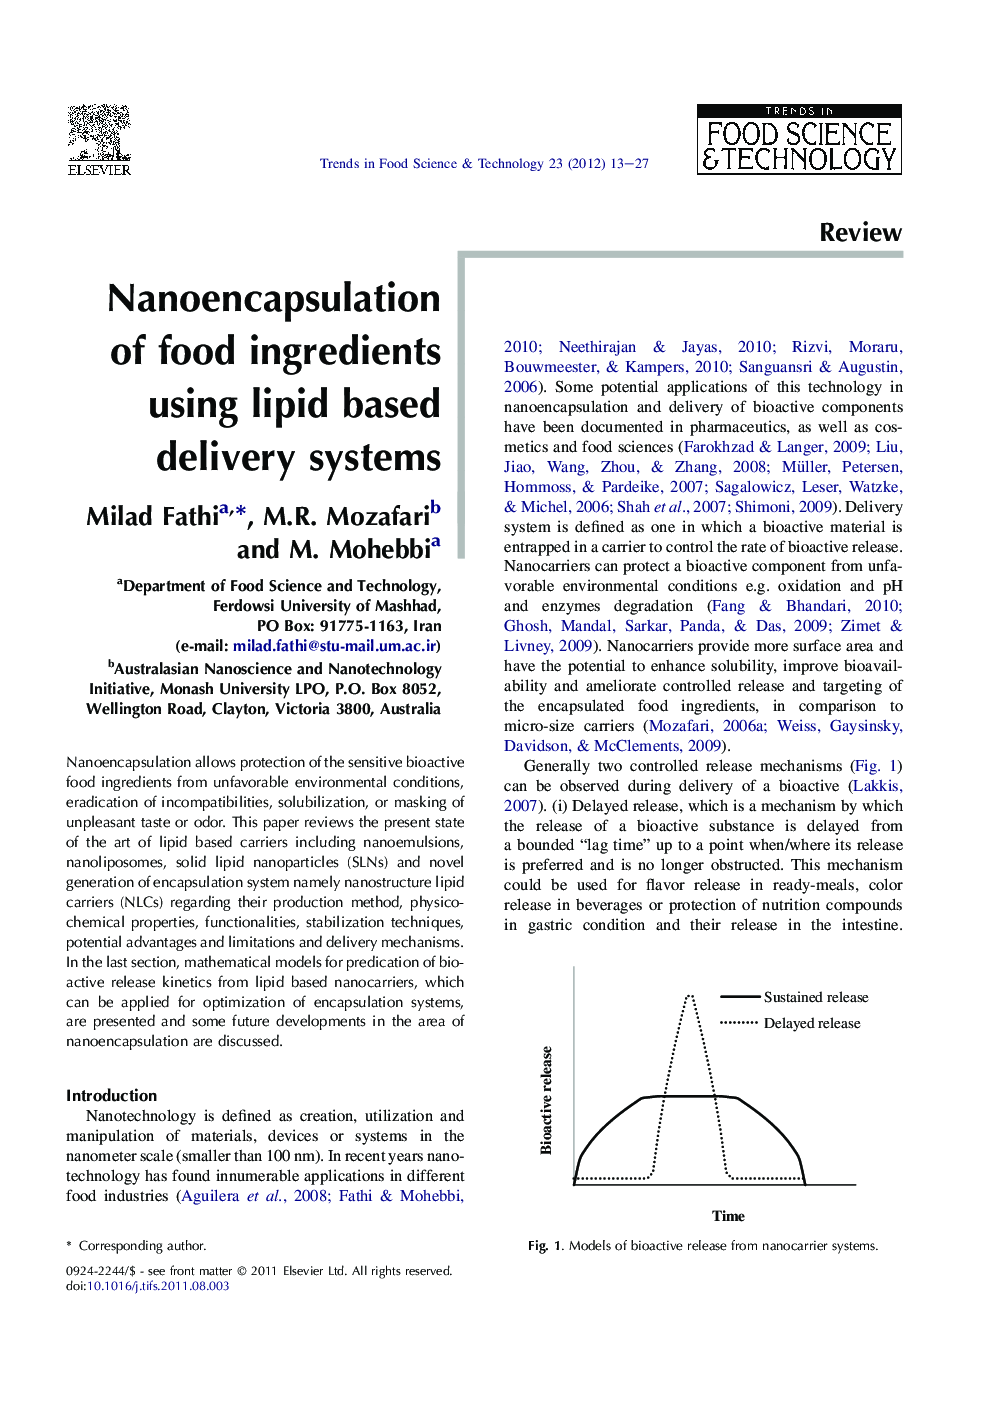 Nanoencapsulation of food ingredients using lipid based delivery systems